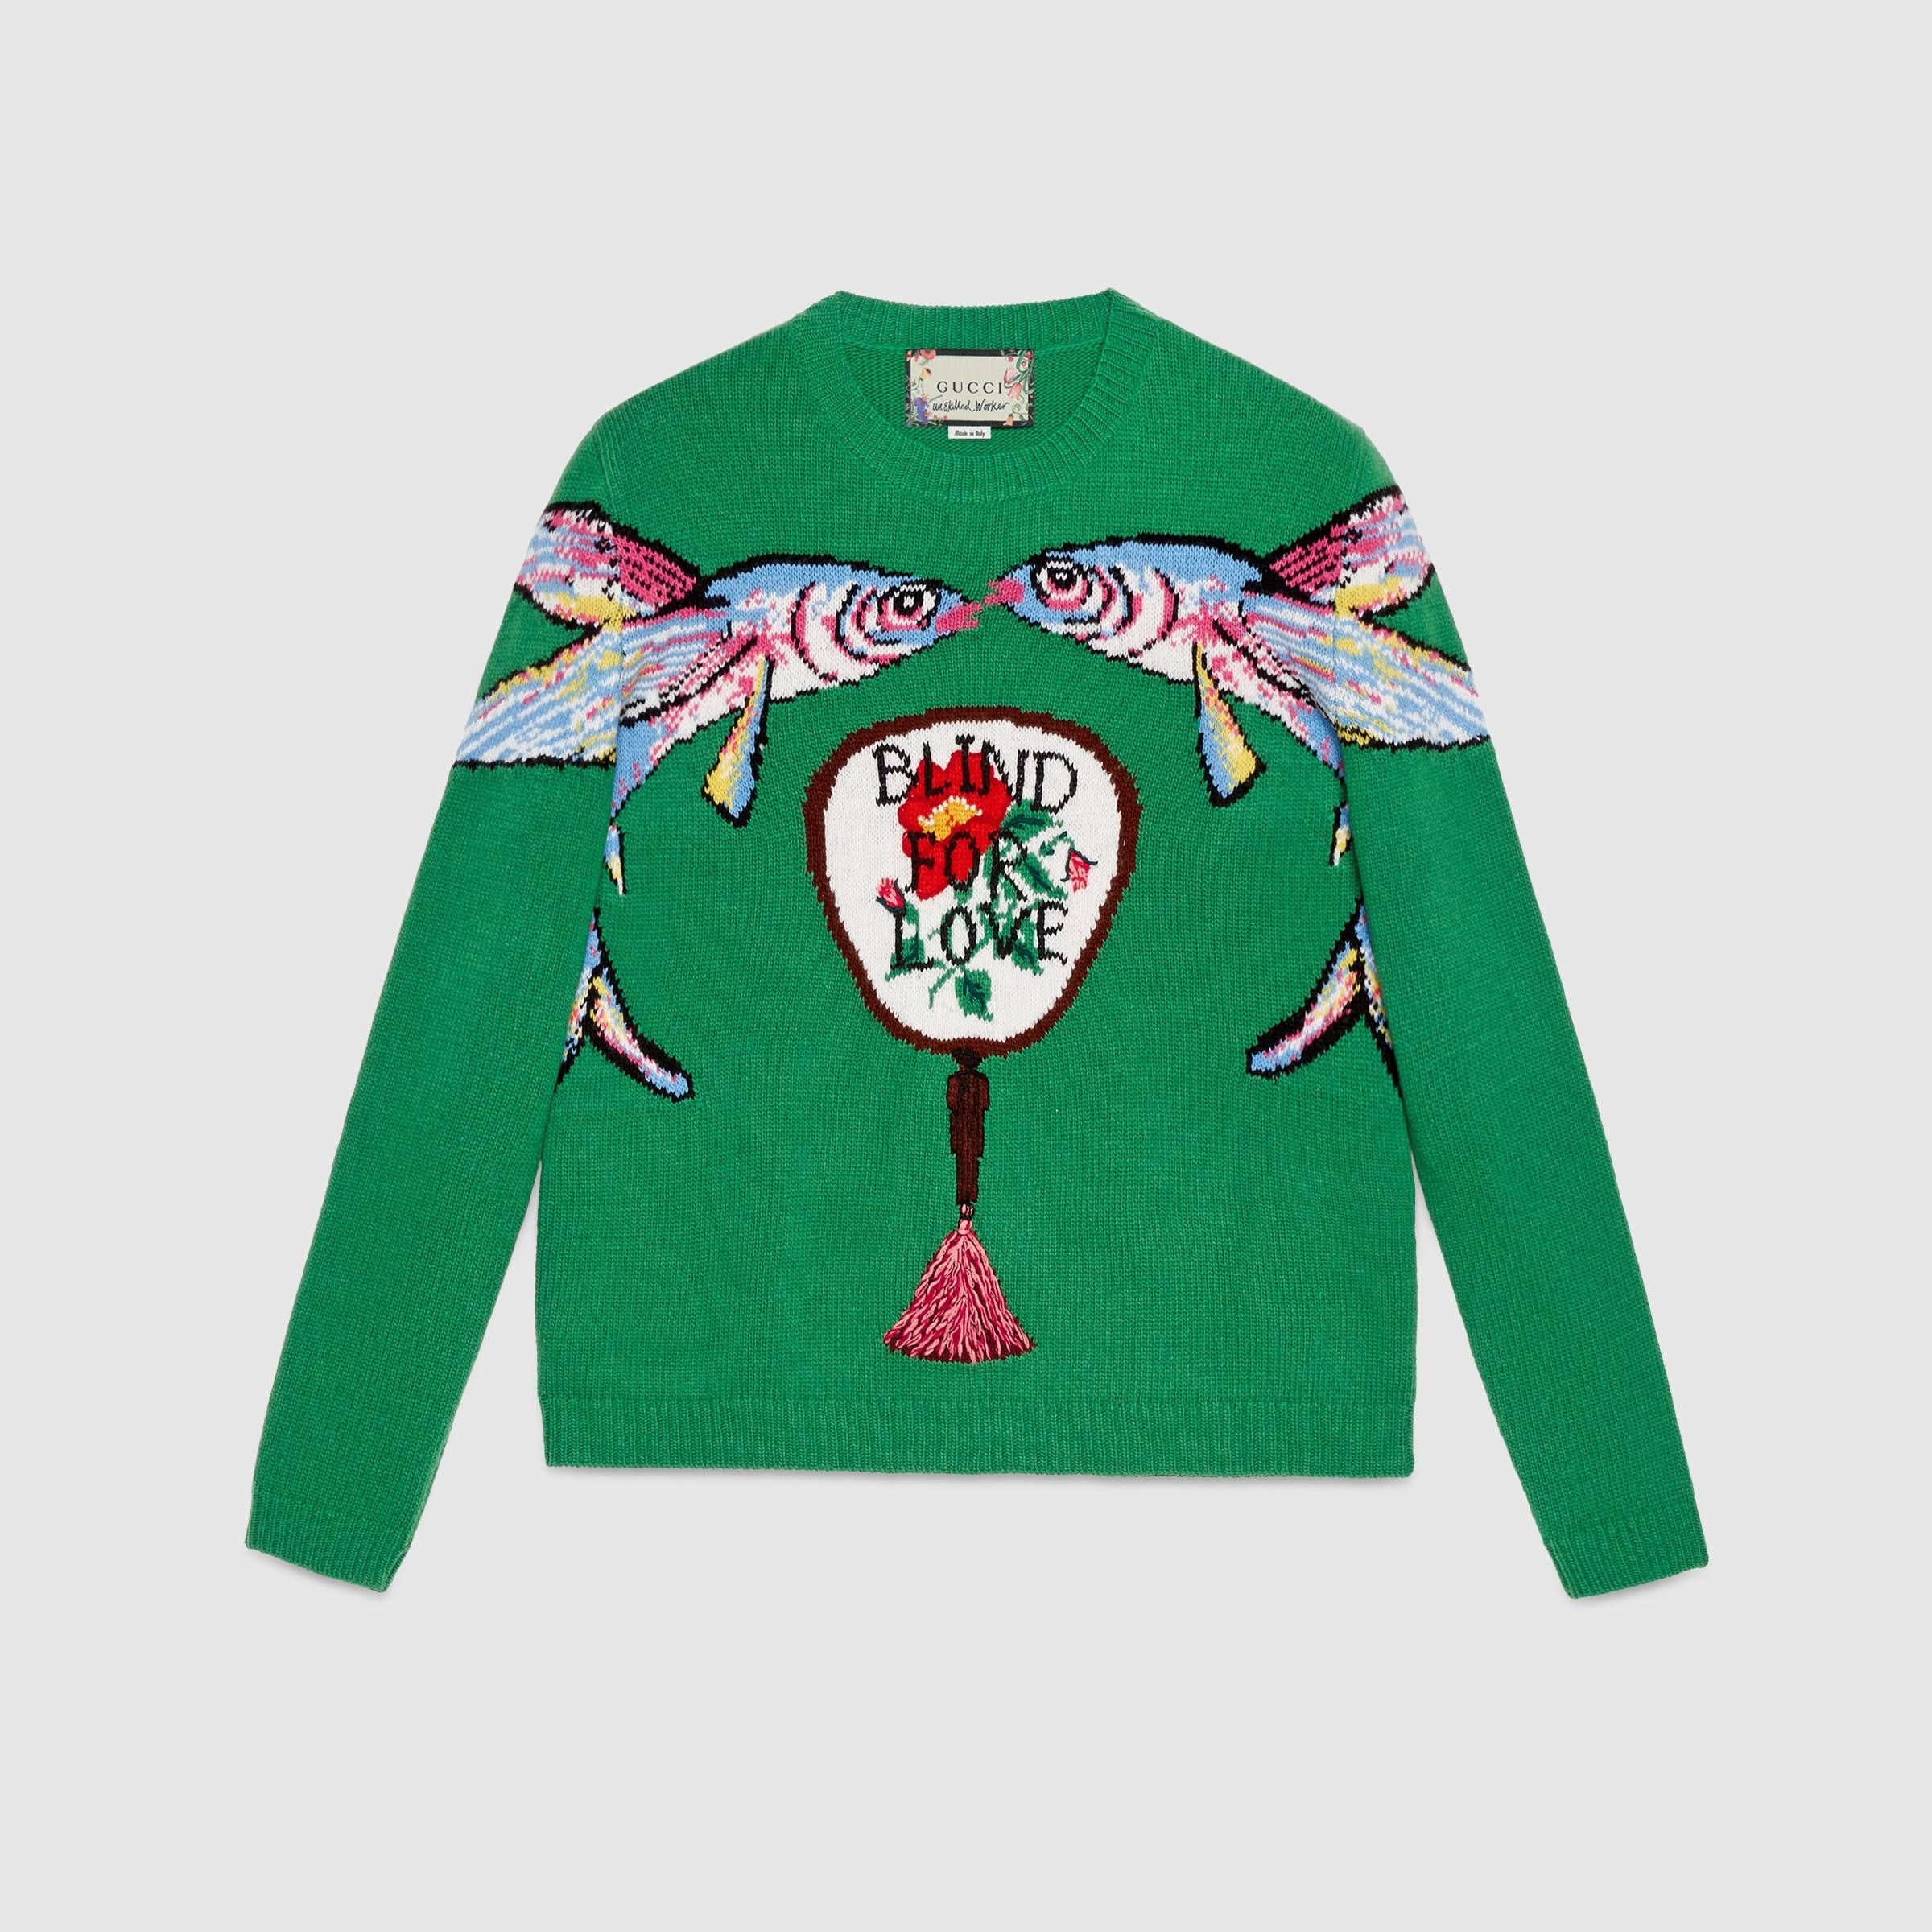 how gucci took back the ‘ugly christmas sweater’ & made you buy it